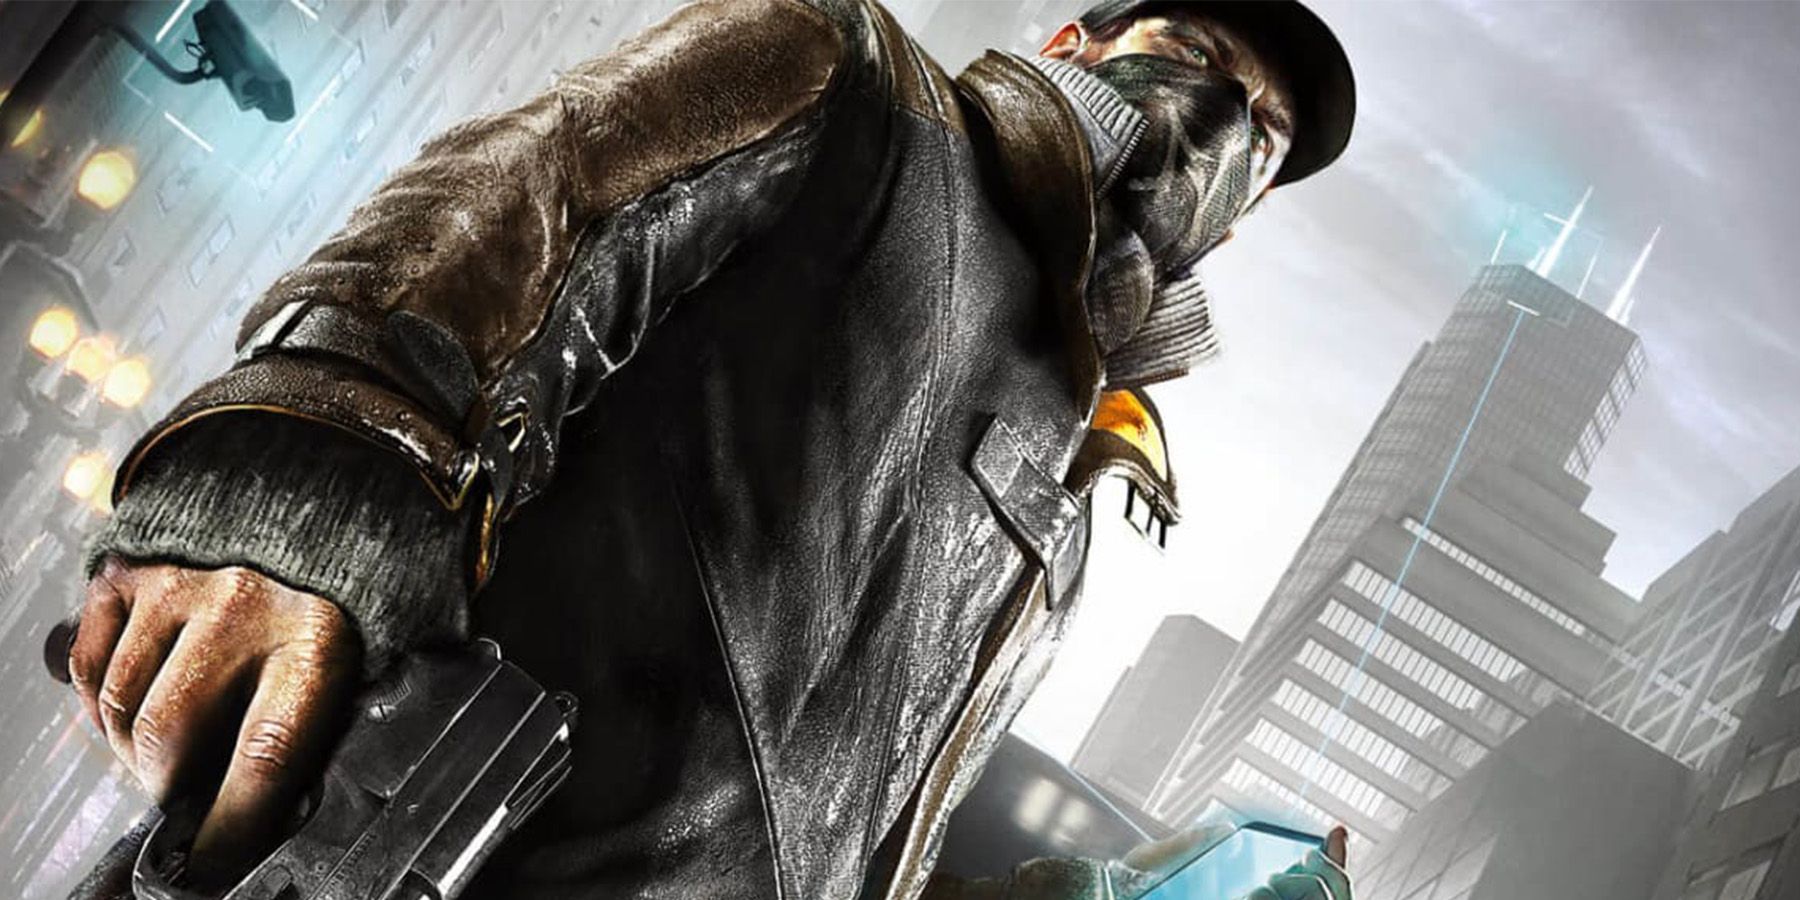 who is the most well-written character in Watch Dogs series? : r/watch_dogs